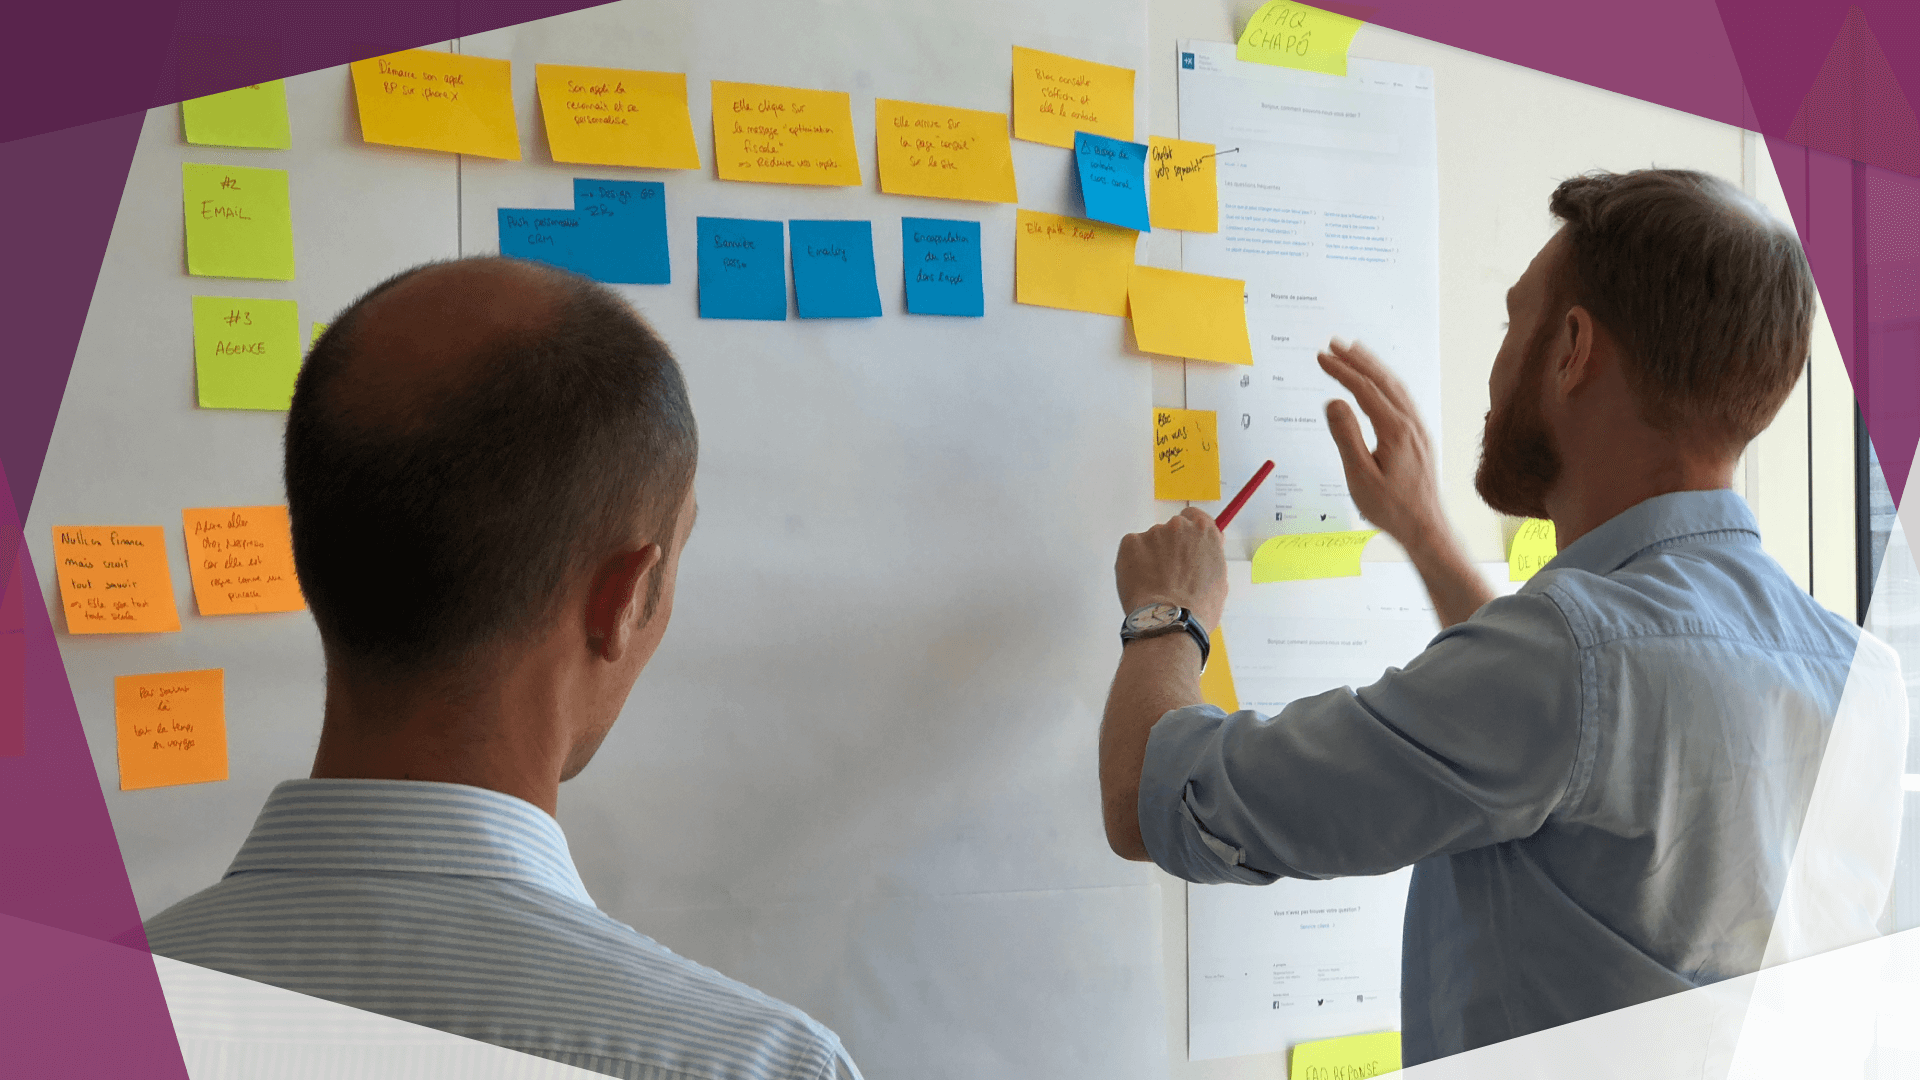 Scrum or not to Scrum? Pros and Cons of Scrum  - Image